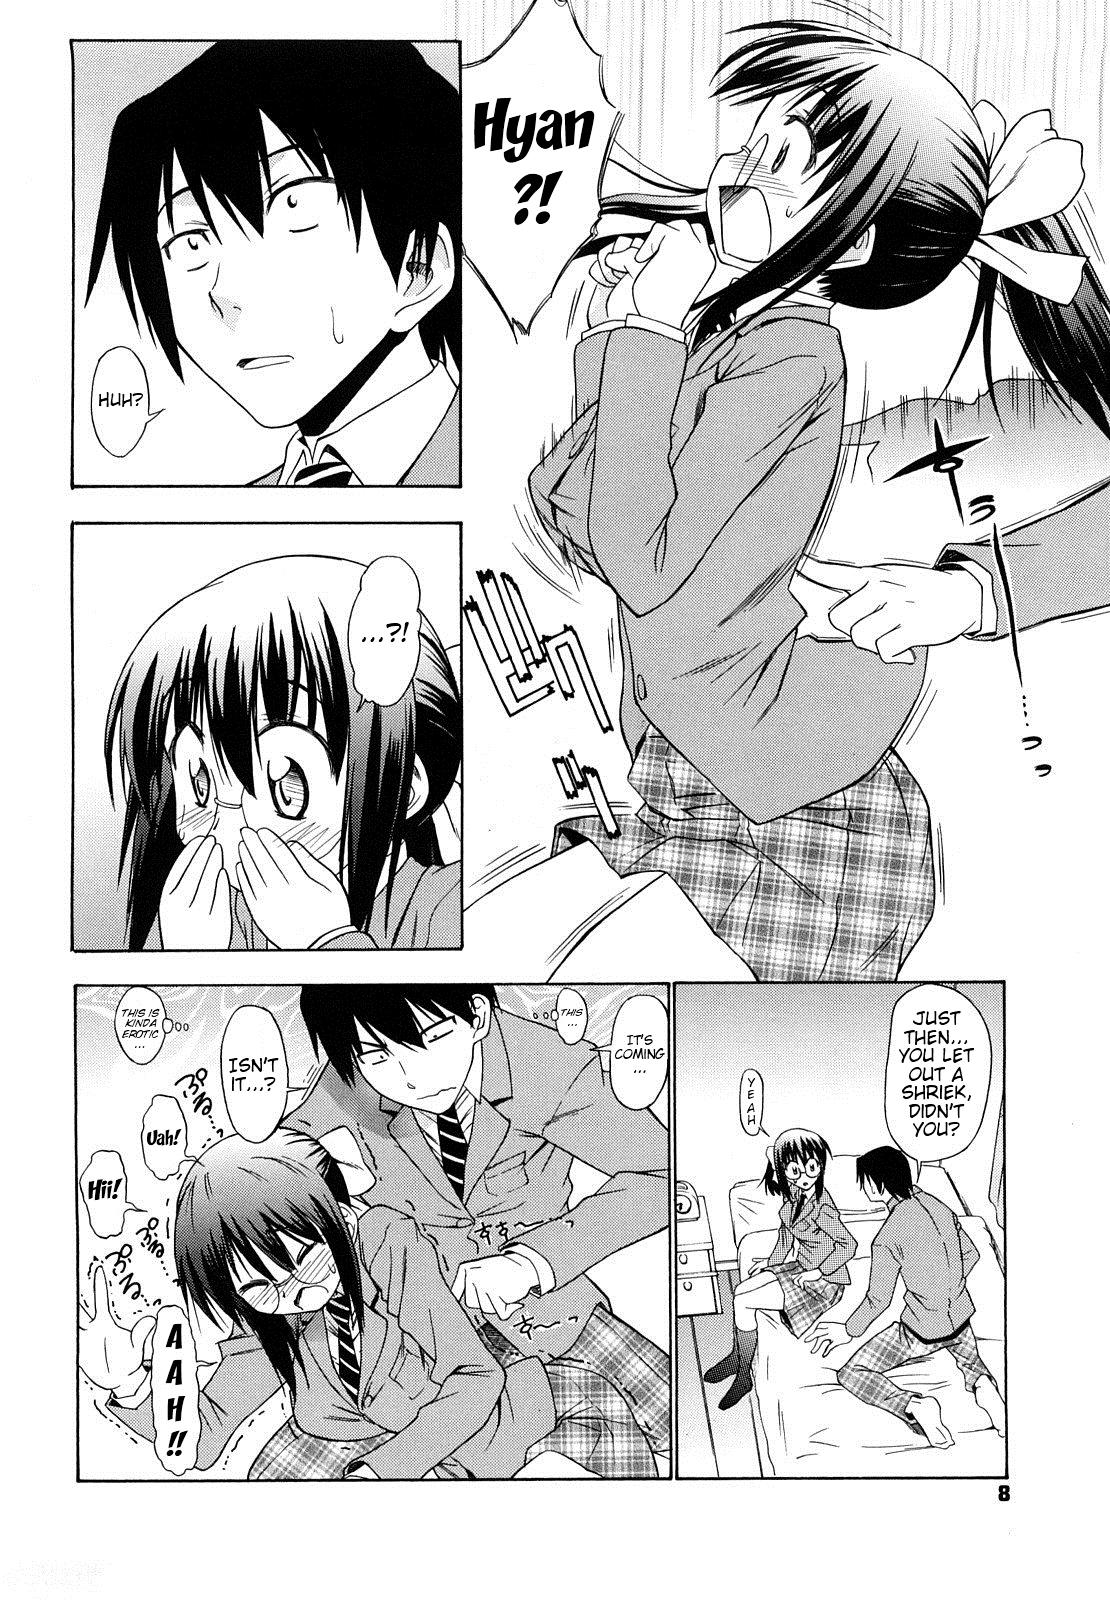 Clit Ai ga Ippai Ero wa Oppai | Lots of Love, Boobs are for Sex Hugecock - Page 10